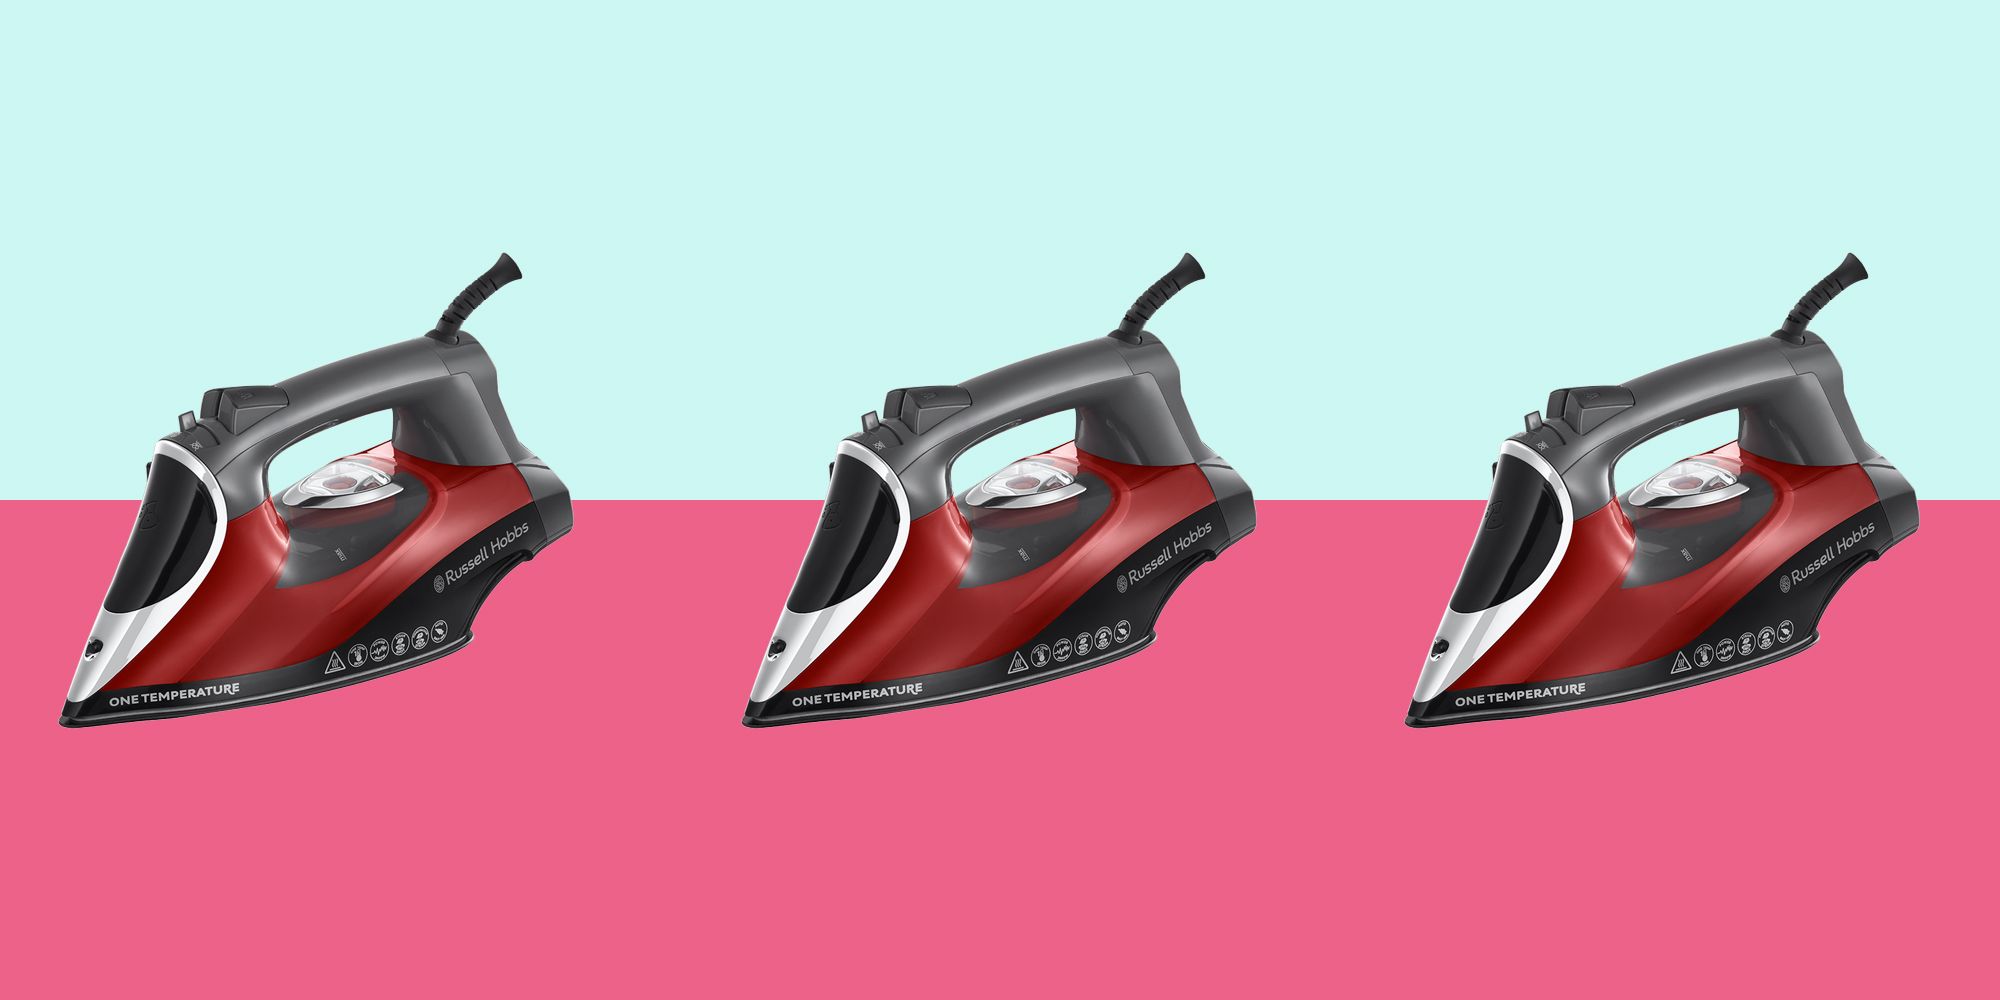 best clothes iron on the market